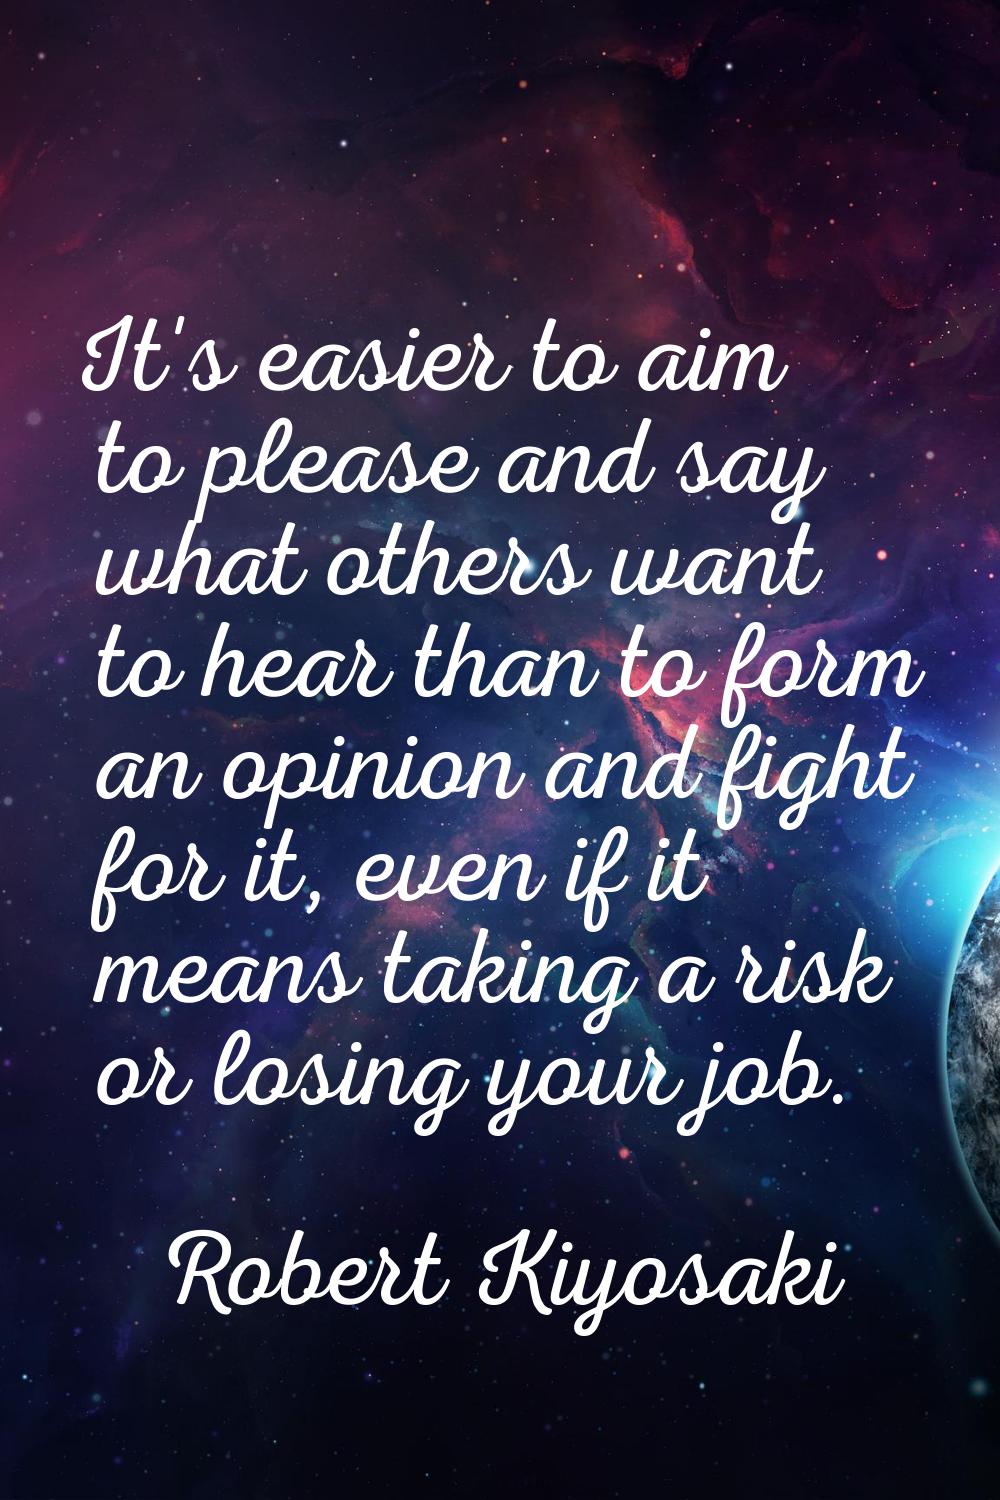 It's easier to aim to please and say what others want to hear than to form an opinion and fight for